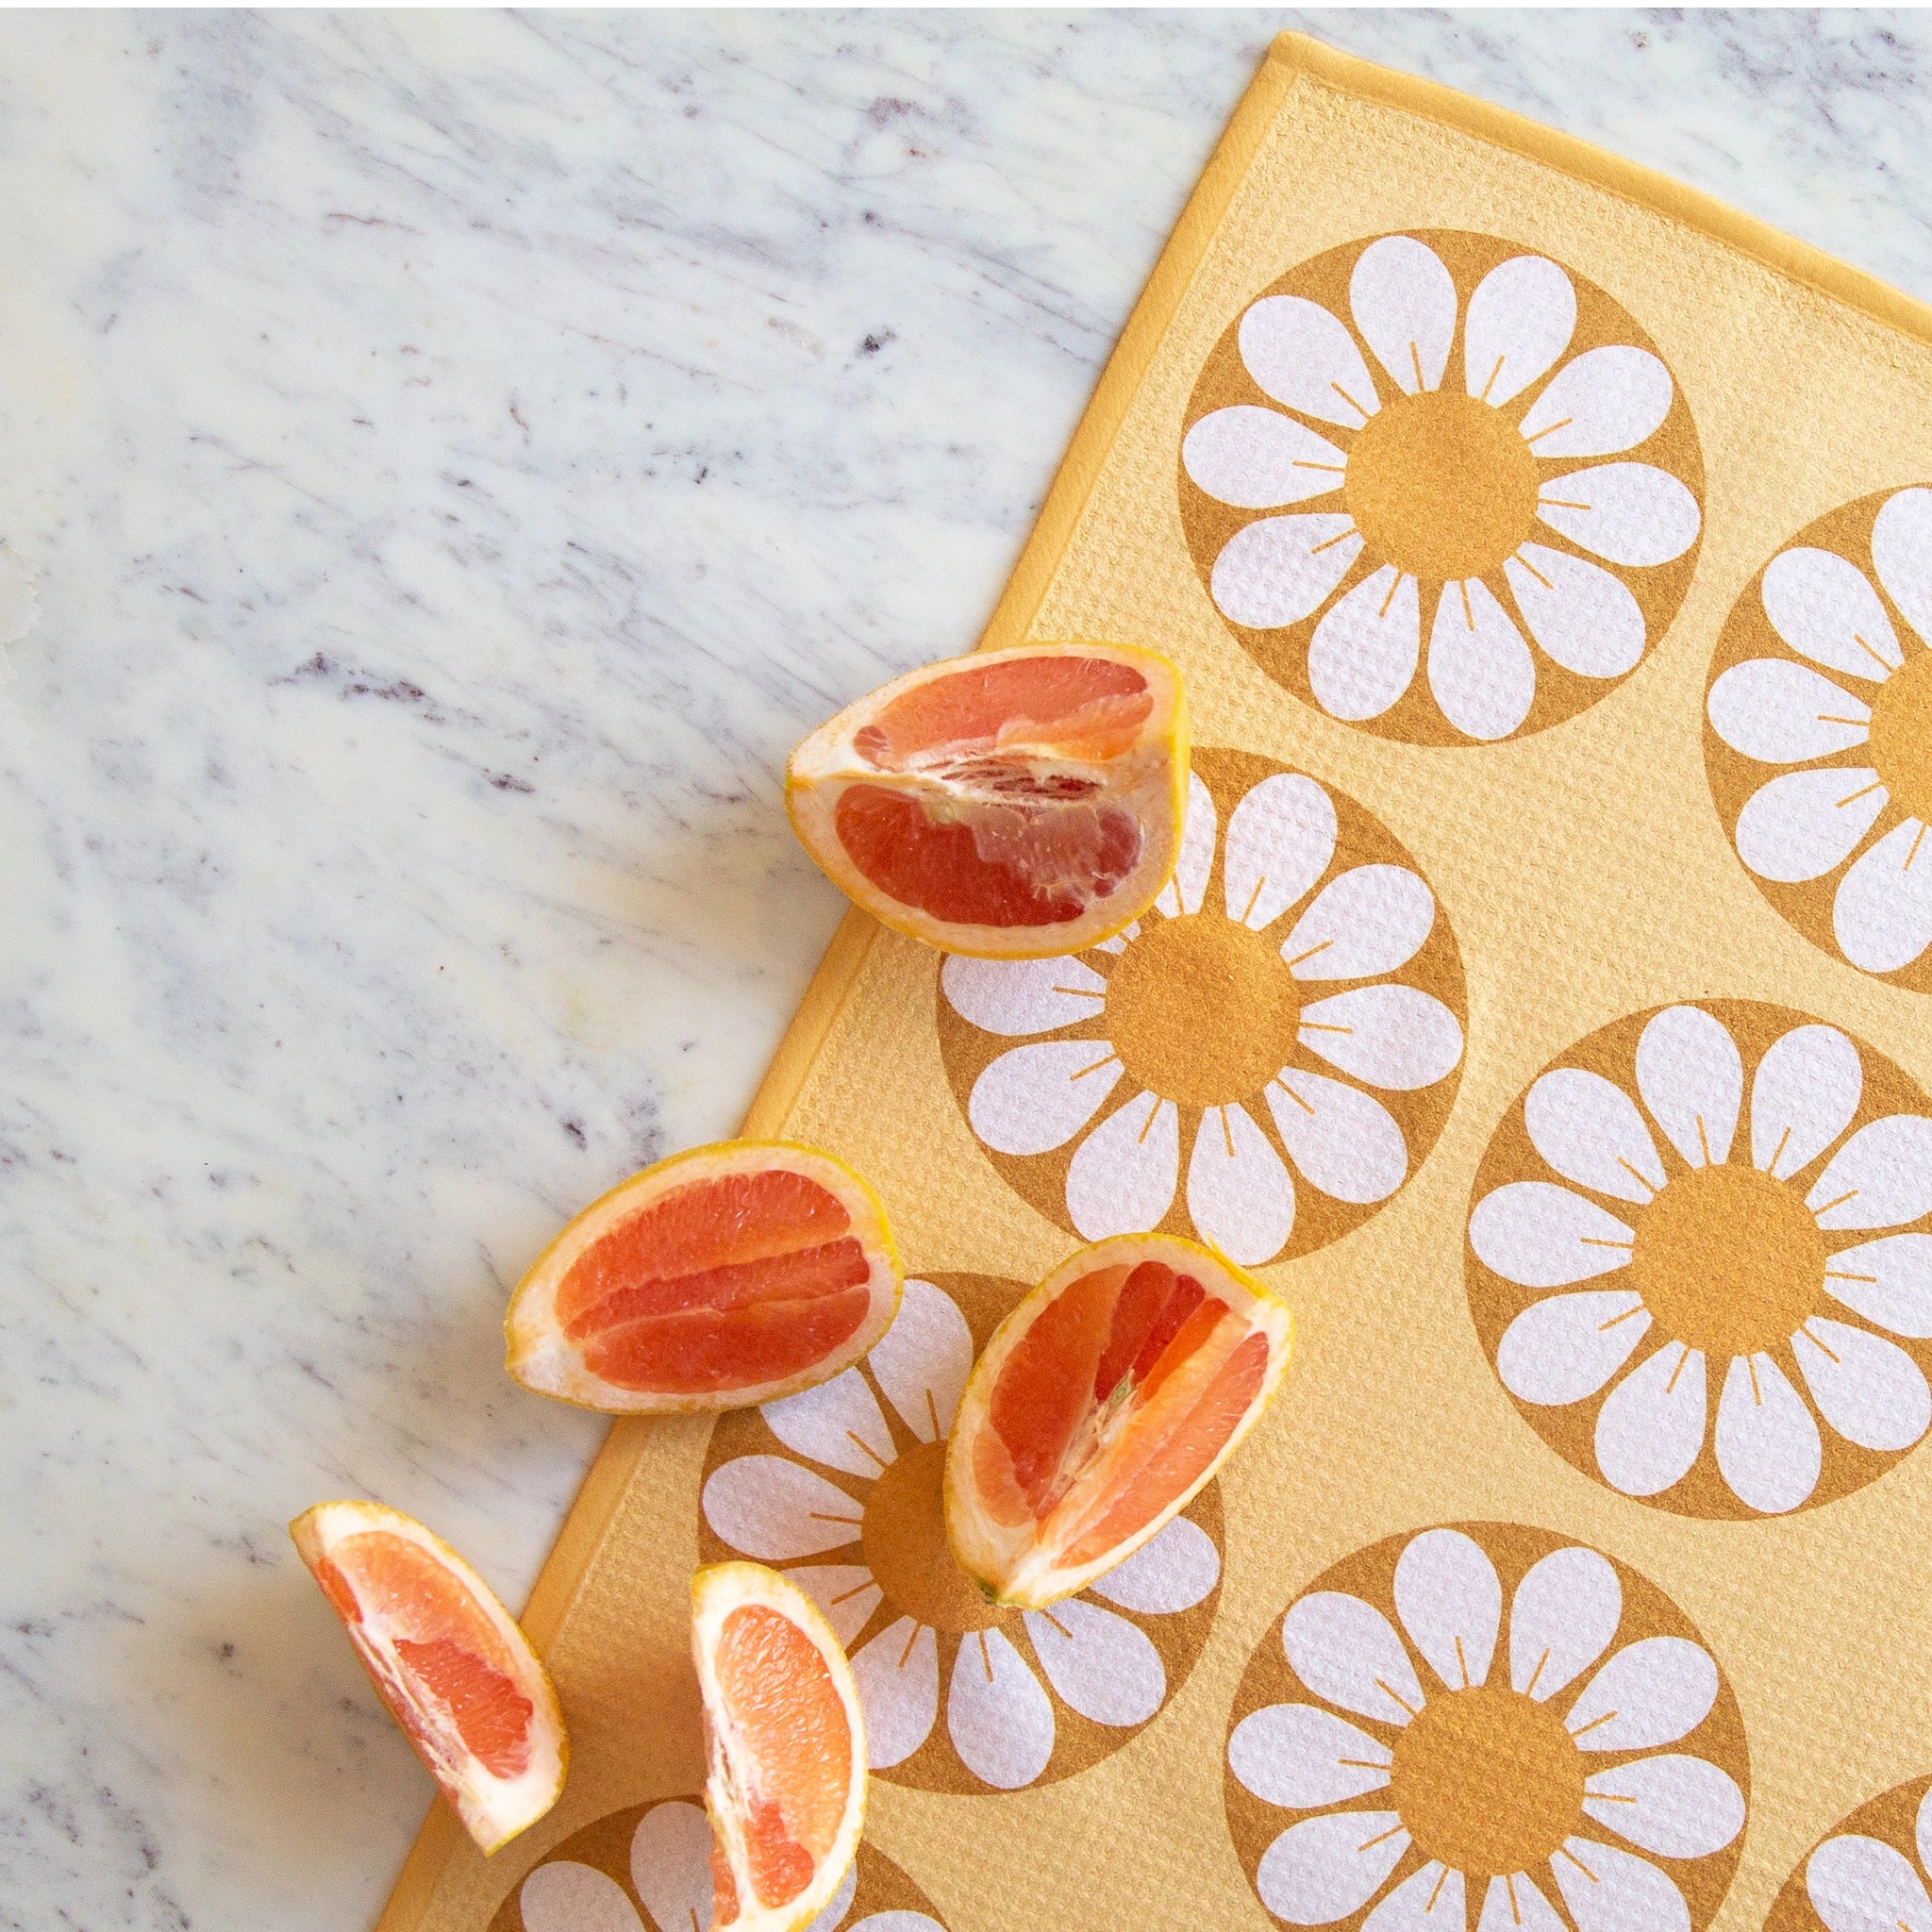 On a marble background is a yellow and white daisy print kitchen towel with a subtle waffle texture staged with blood orange slices. 